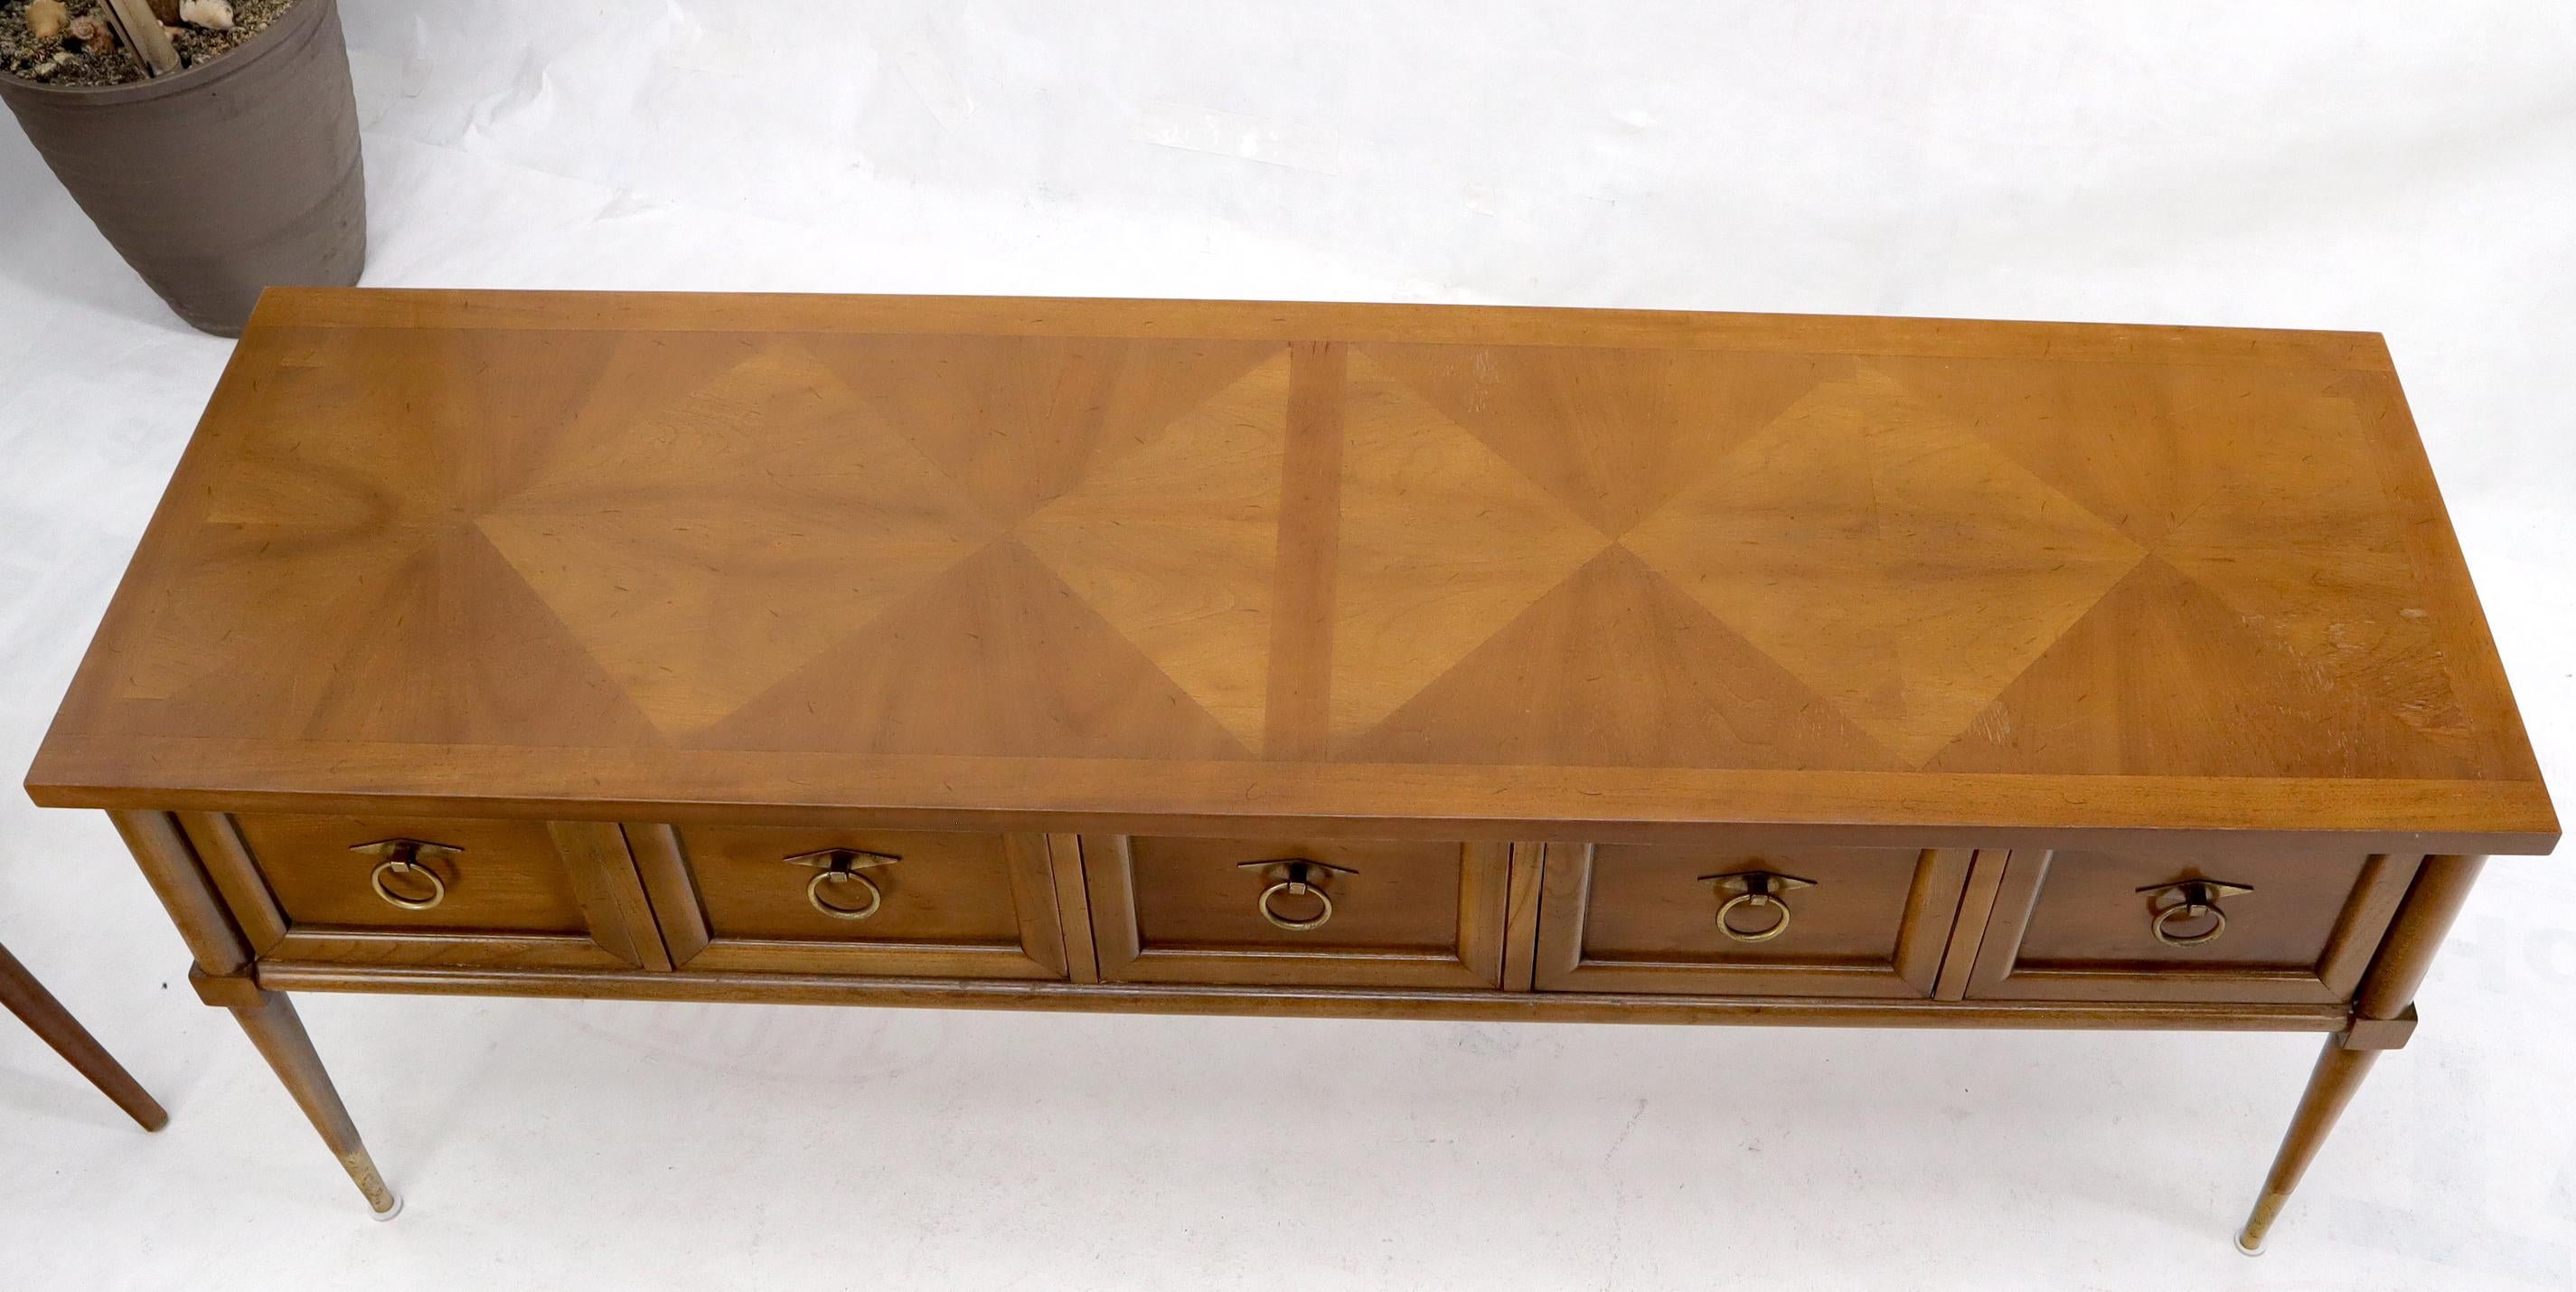 20th Century Mid-Century Modern Long Low Profile Credenza with Round Ring Drop Pulls For Sale